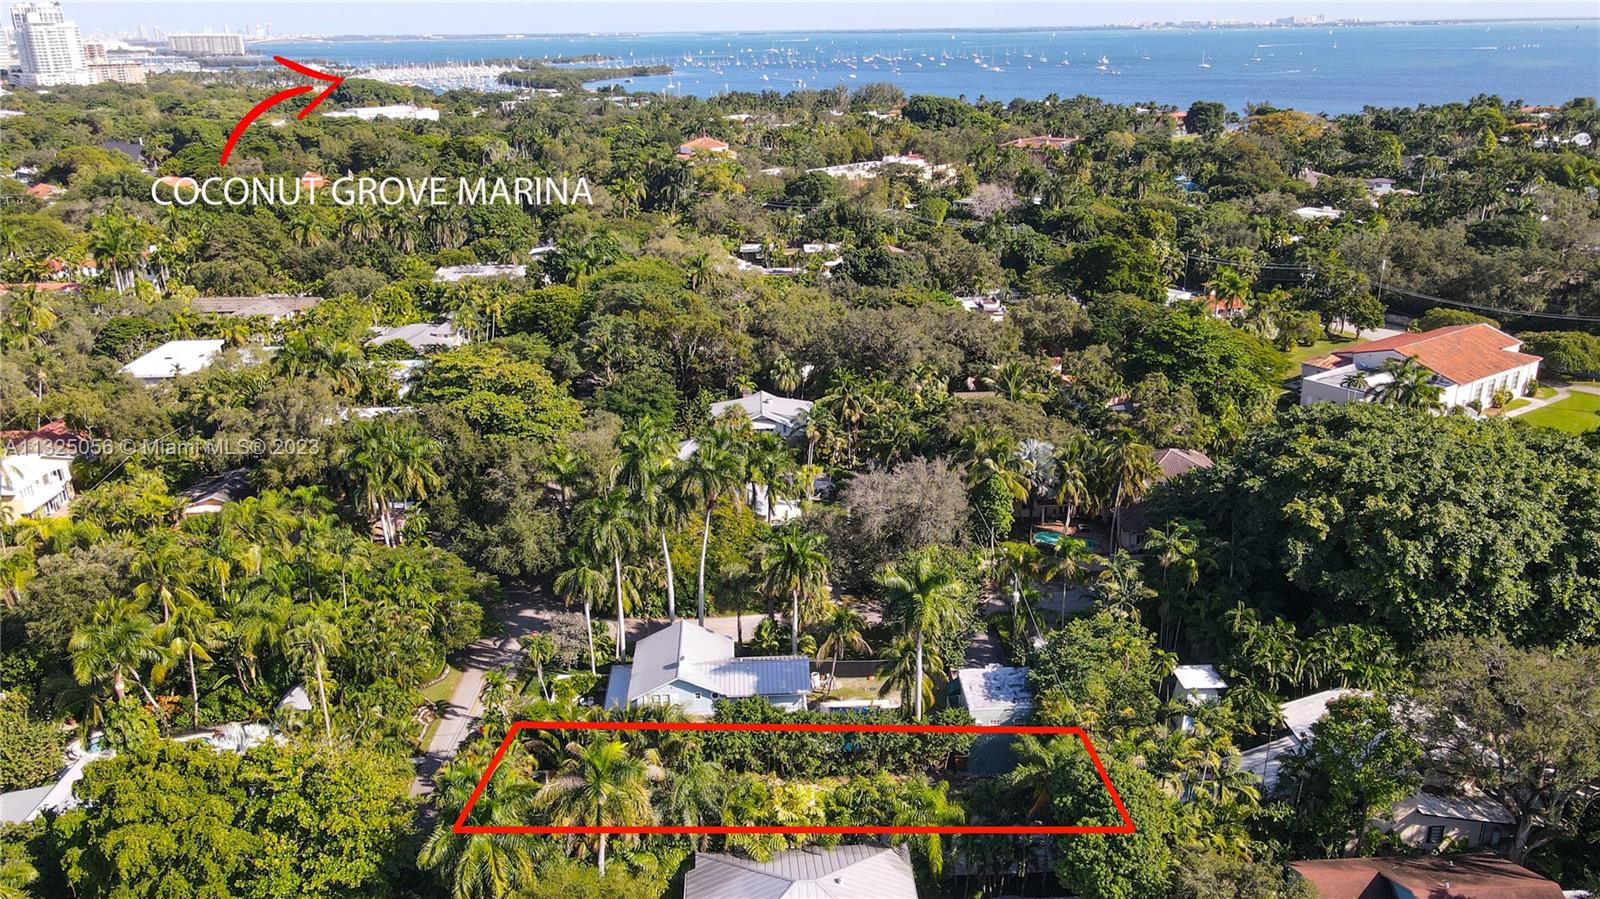 Location! Location! Location! Very sought after Royal Palm Ave in South Coconut Grove development opportunity. Build the home of your dreams in one of the most sought-after neighborhoods in Miami! You will fall in love with this area of Coconut Grove, very close to Main Highway, 4 corners, parks, Coco walk, marinas, and world famous restaurants and shops. Vacant 7,000 sq ft lot, LOT SIZE 50.000 X 140 ready to build. Great opportunity for investors as well! DISCLAIMER: PLEASE NOTE THE RENDERING SHOWN IS FOR ILLUSTRATION PURPOSE ONLY